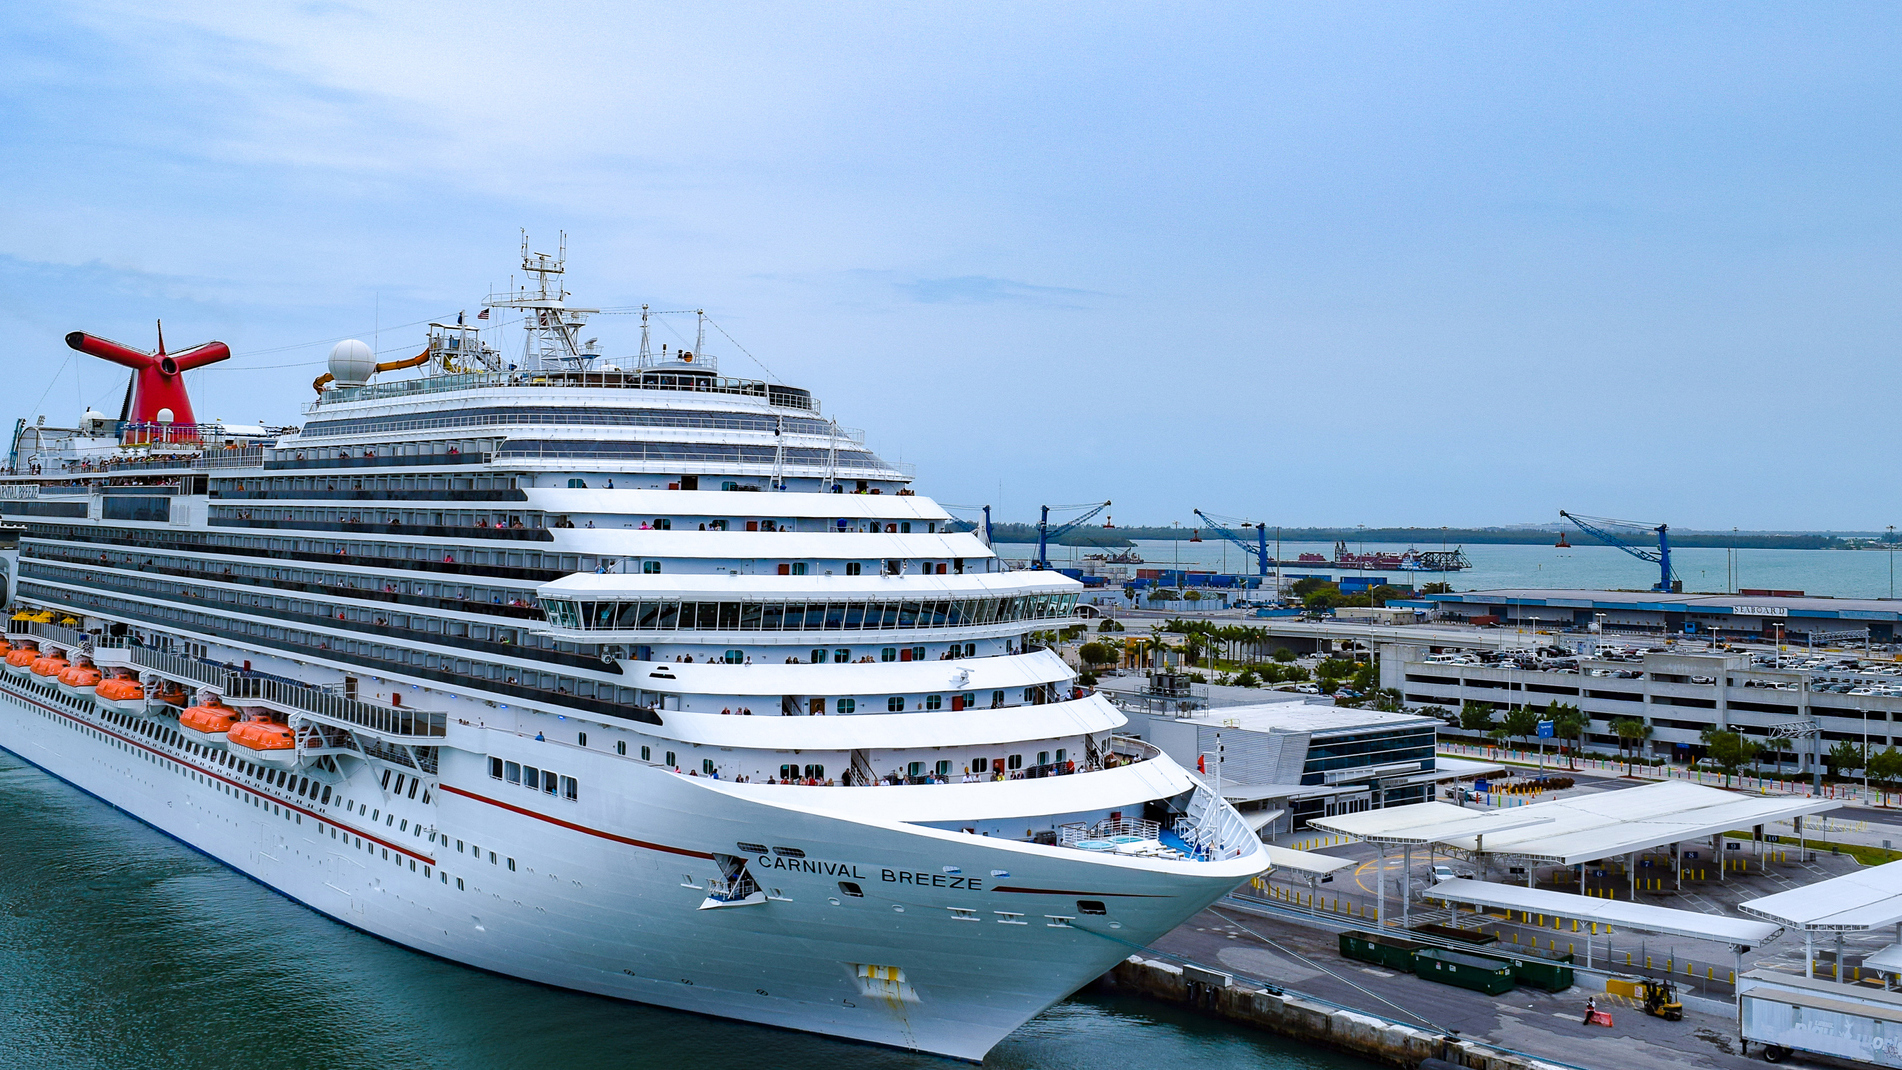 Port Canaveral CEO Captain John W. Murray on the impact of the coronavirus pandemic on the cruise industry. 